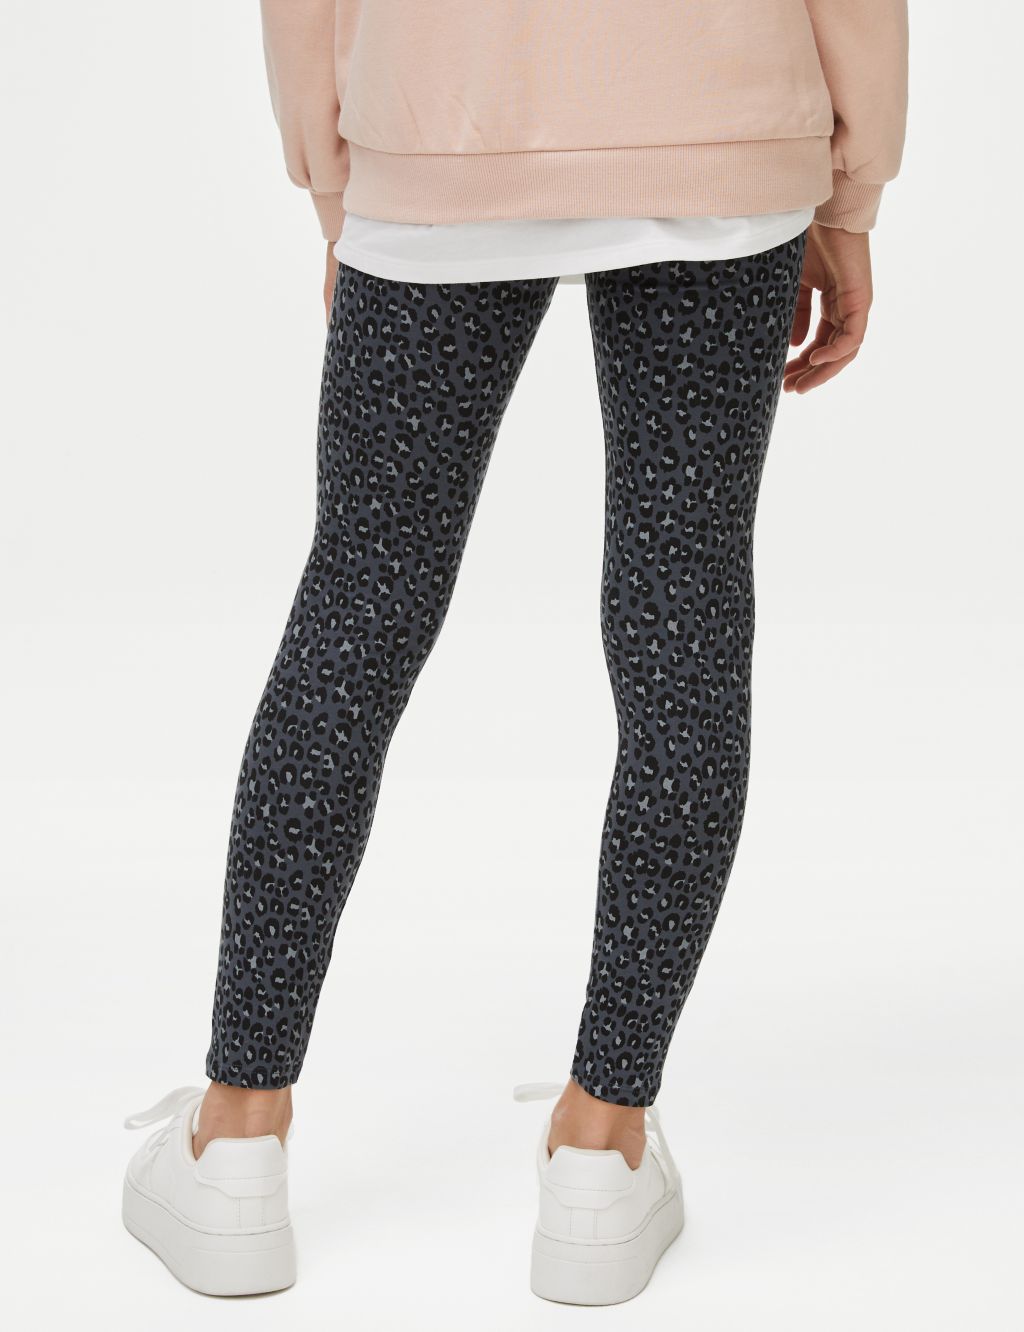 Cotton Rich Patterned Leggings (6-16 Yrs) image 4